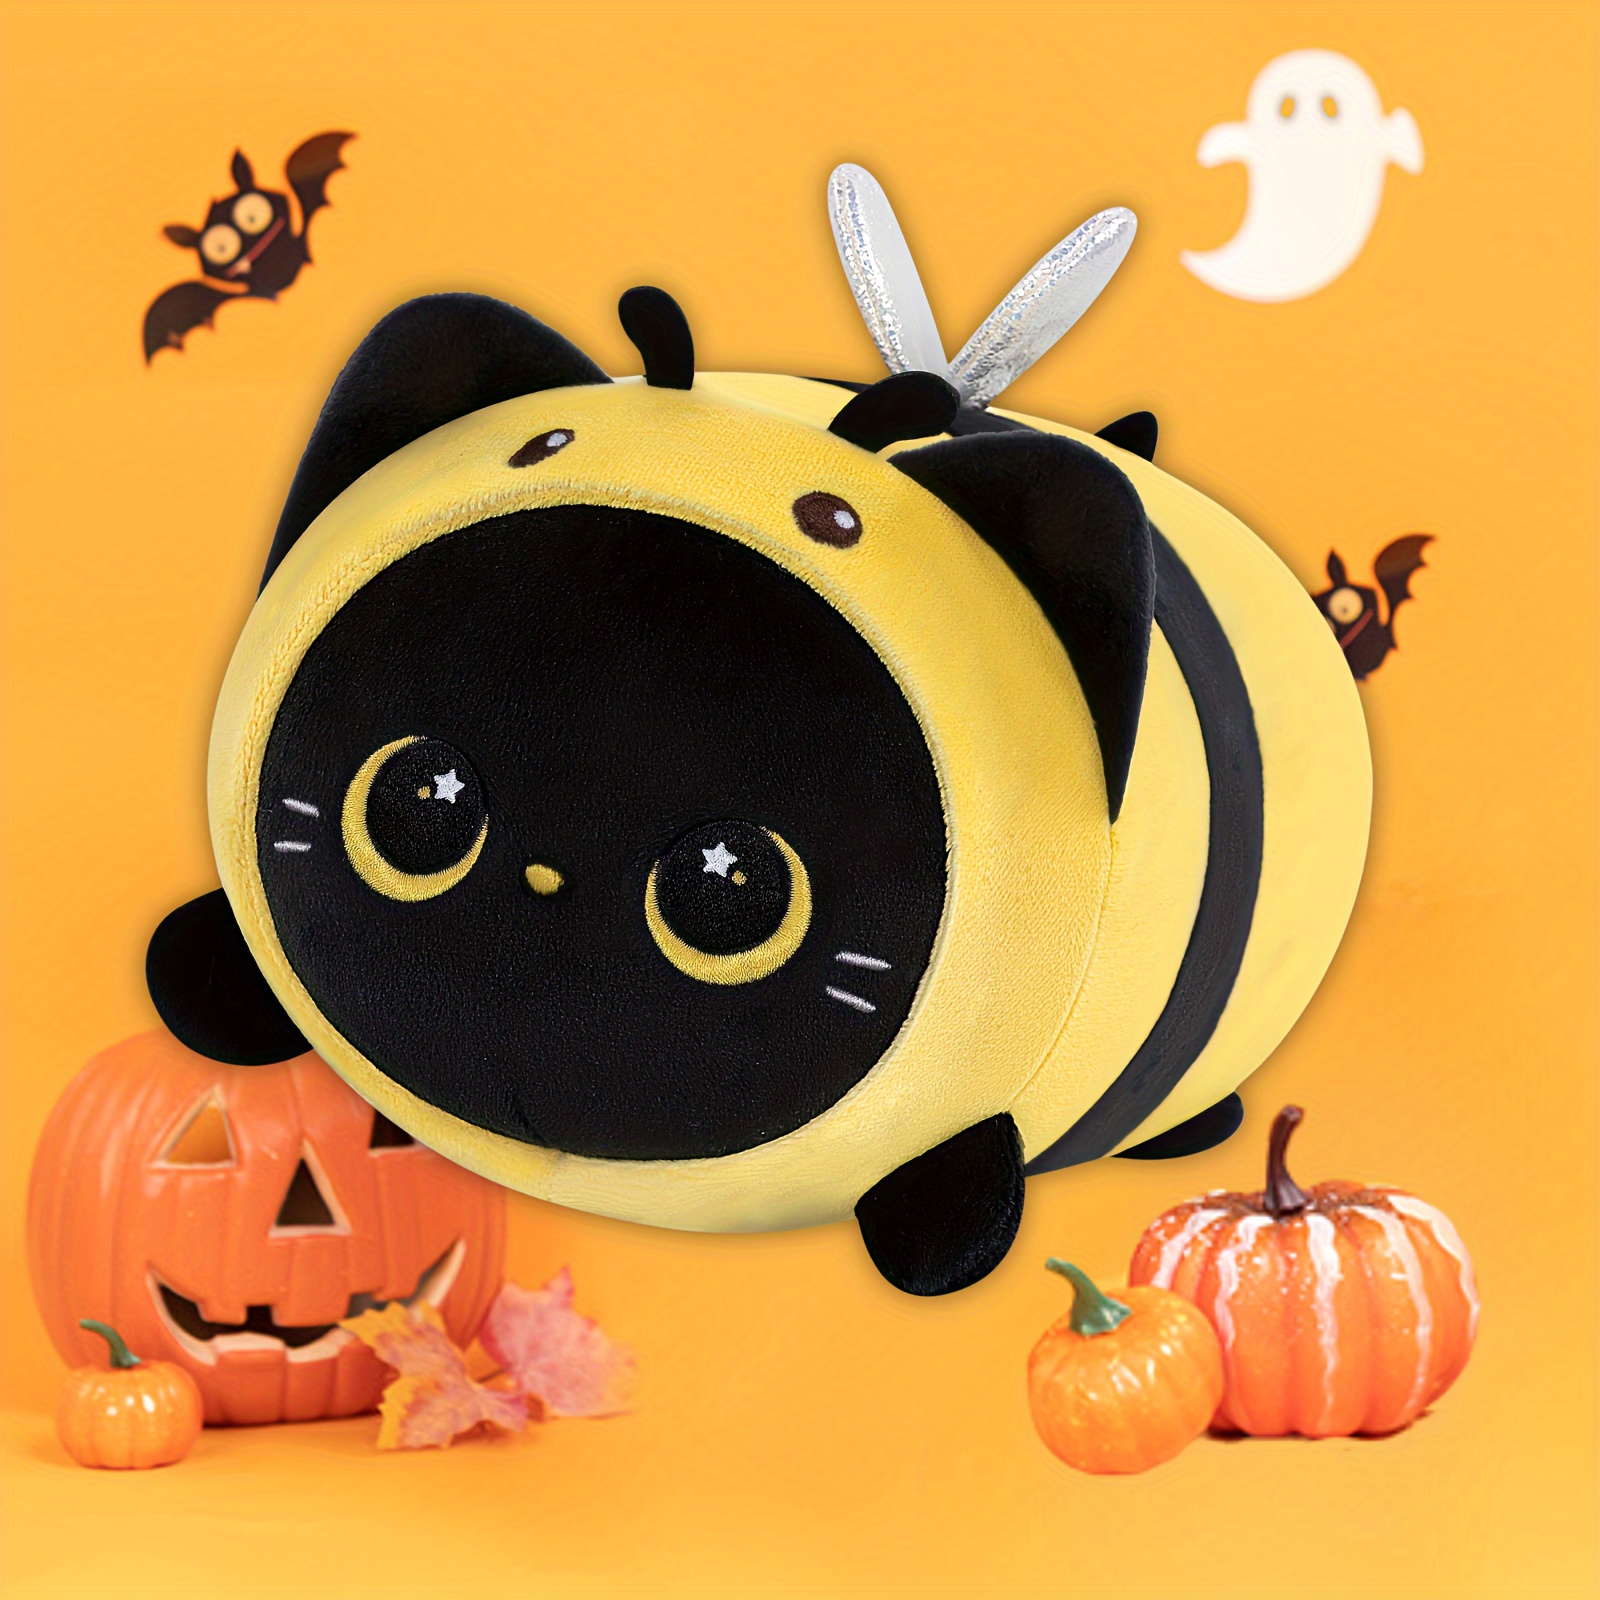 

Mewaii Cute Black Cat Bee Plush Pillow, 7inch Cat Honeybee Stuffed Toy, Kitten Plushies With Honeybee Outfit Costume, Soft Squishy Gifts